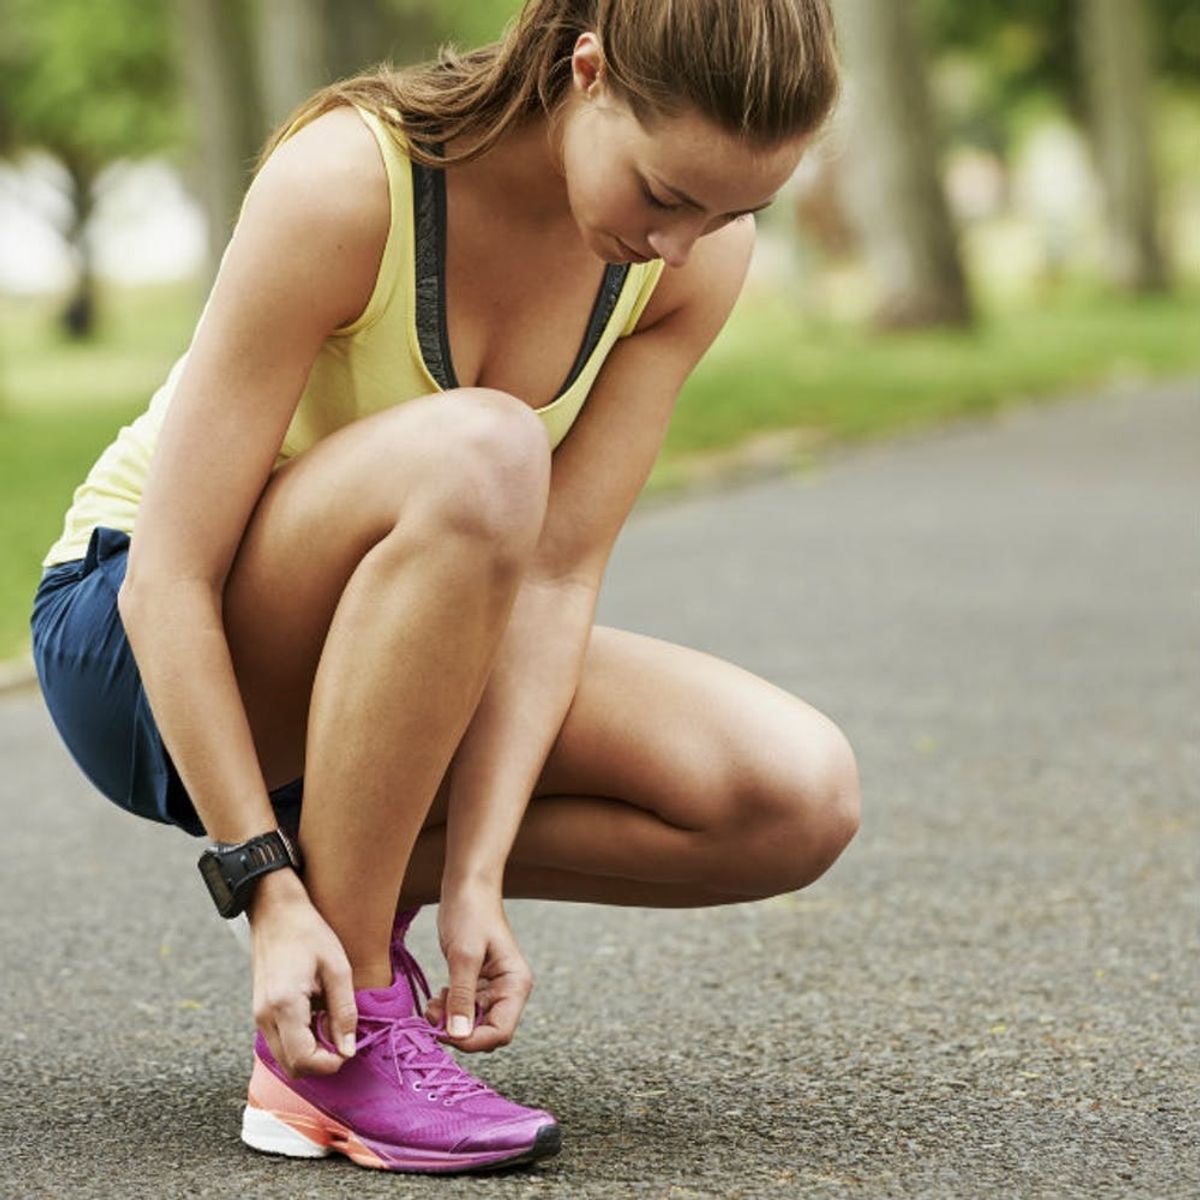 This One Super Simple Thing Helps You Avoid Getting Blisters